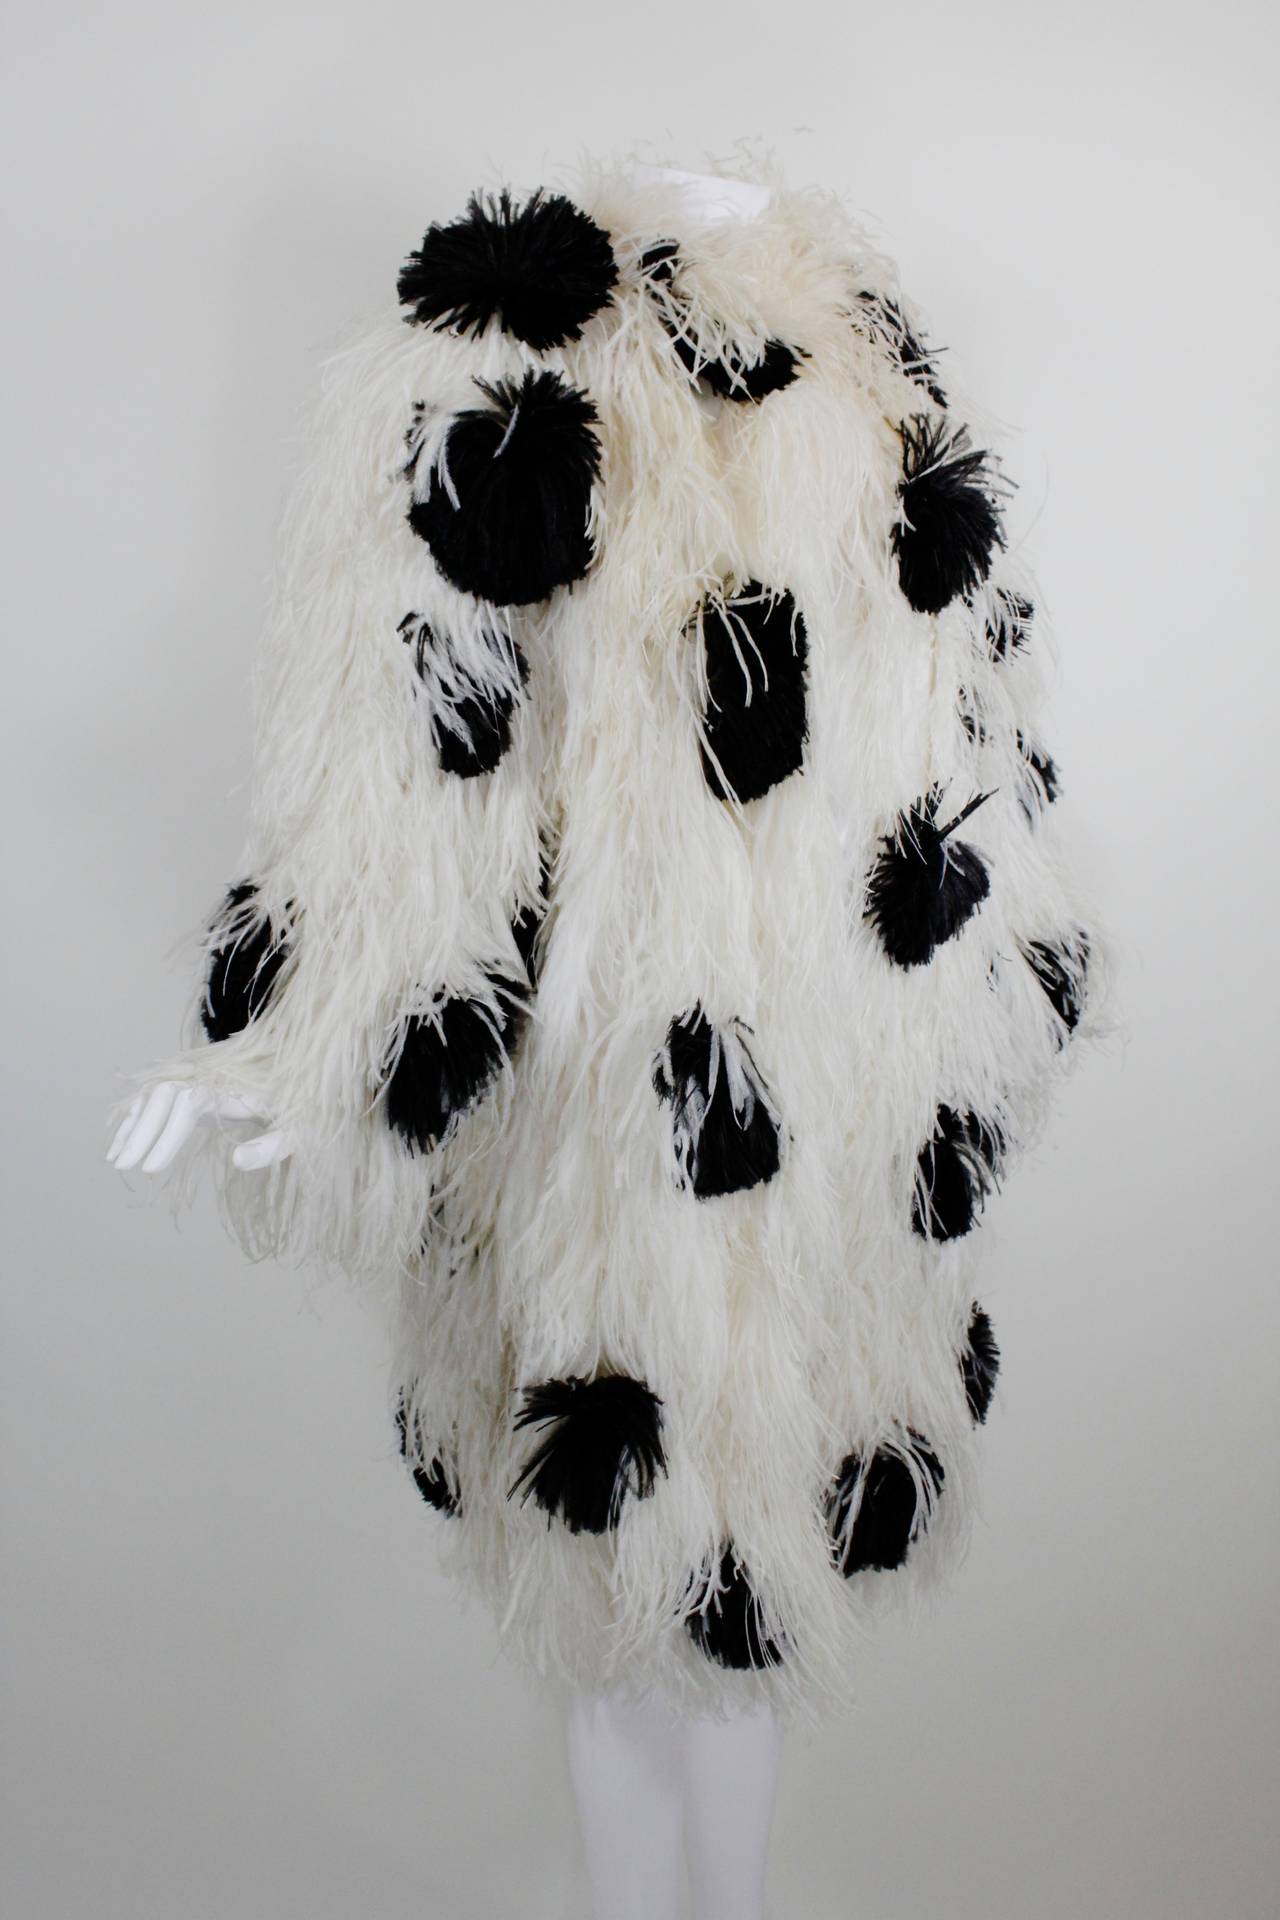 A fabulous ostrich feather coat from Bill Blass featuring snow white feathers dotted with black plumes throughout. The coat is fully lined and has a hook-and-closure at the neck.

Measurements--
Bust: 44 inches
Waist: 44 inches
Hip: 44